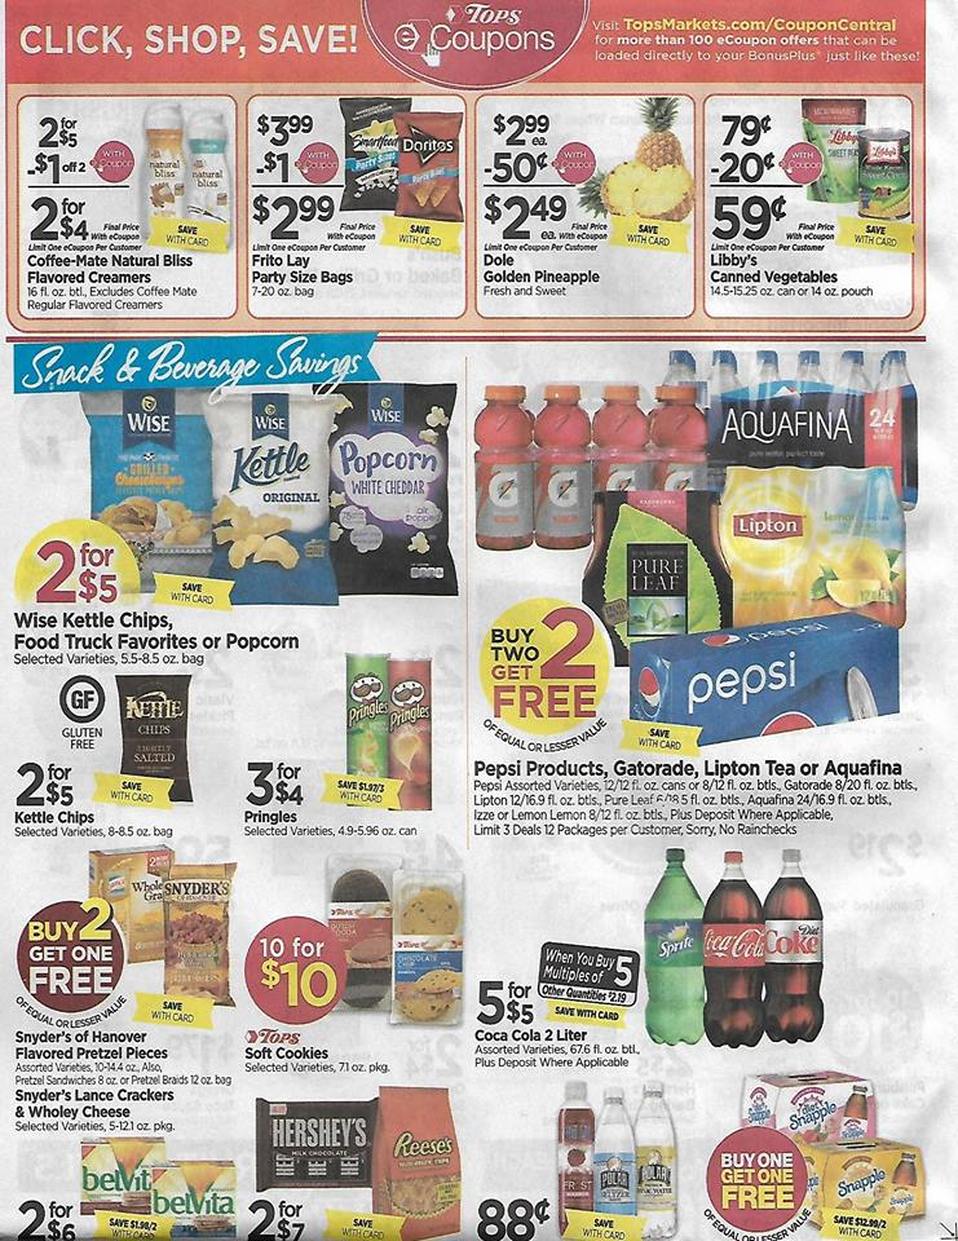 Tops Markets 8/27 9/2 Ad Scan And Coupon Match Ups